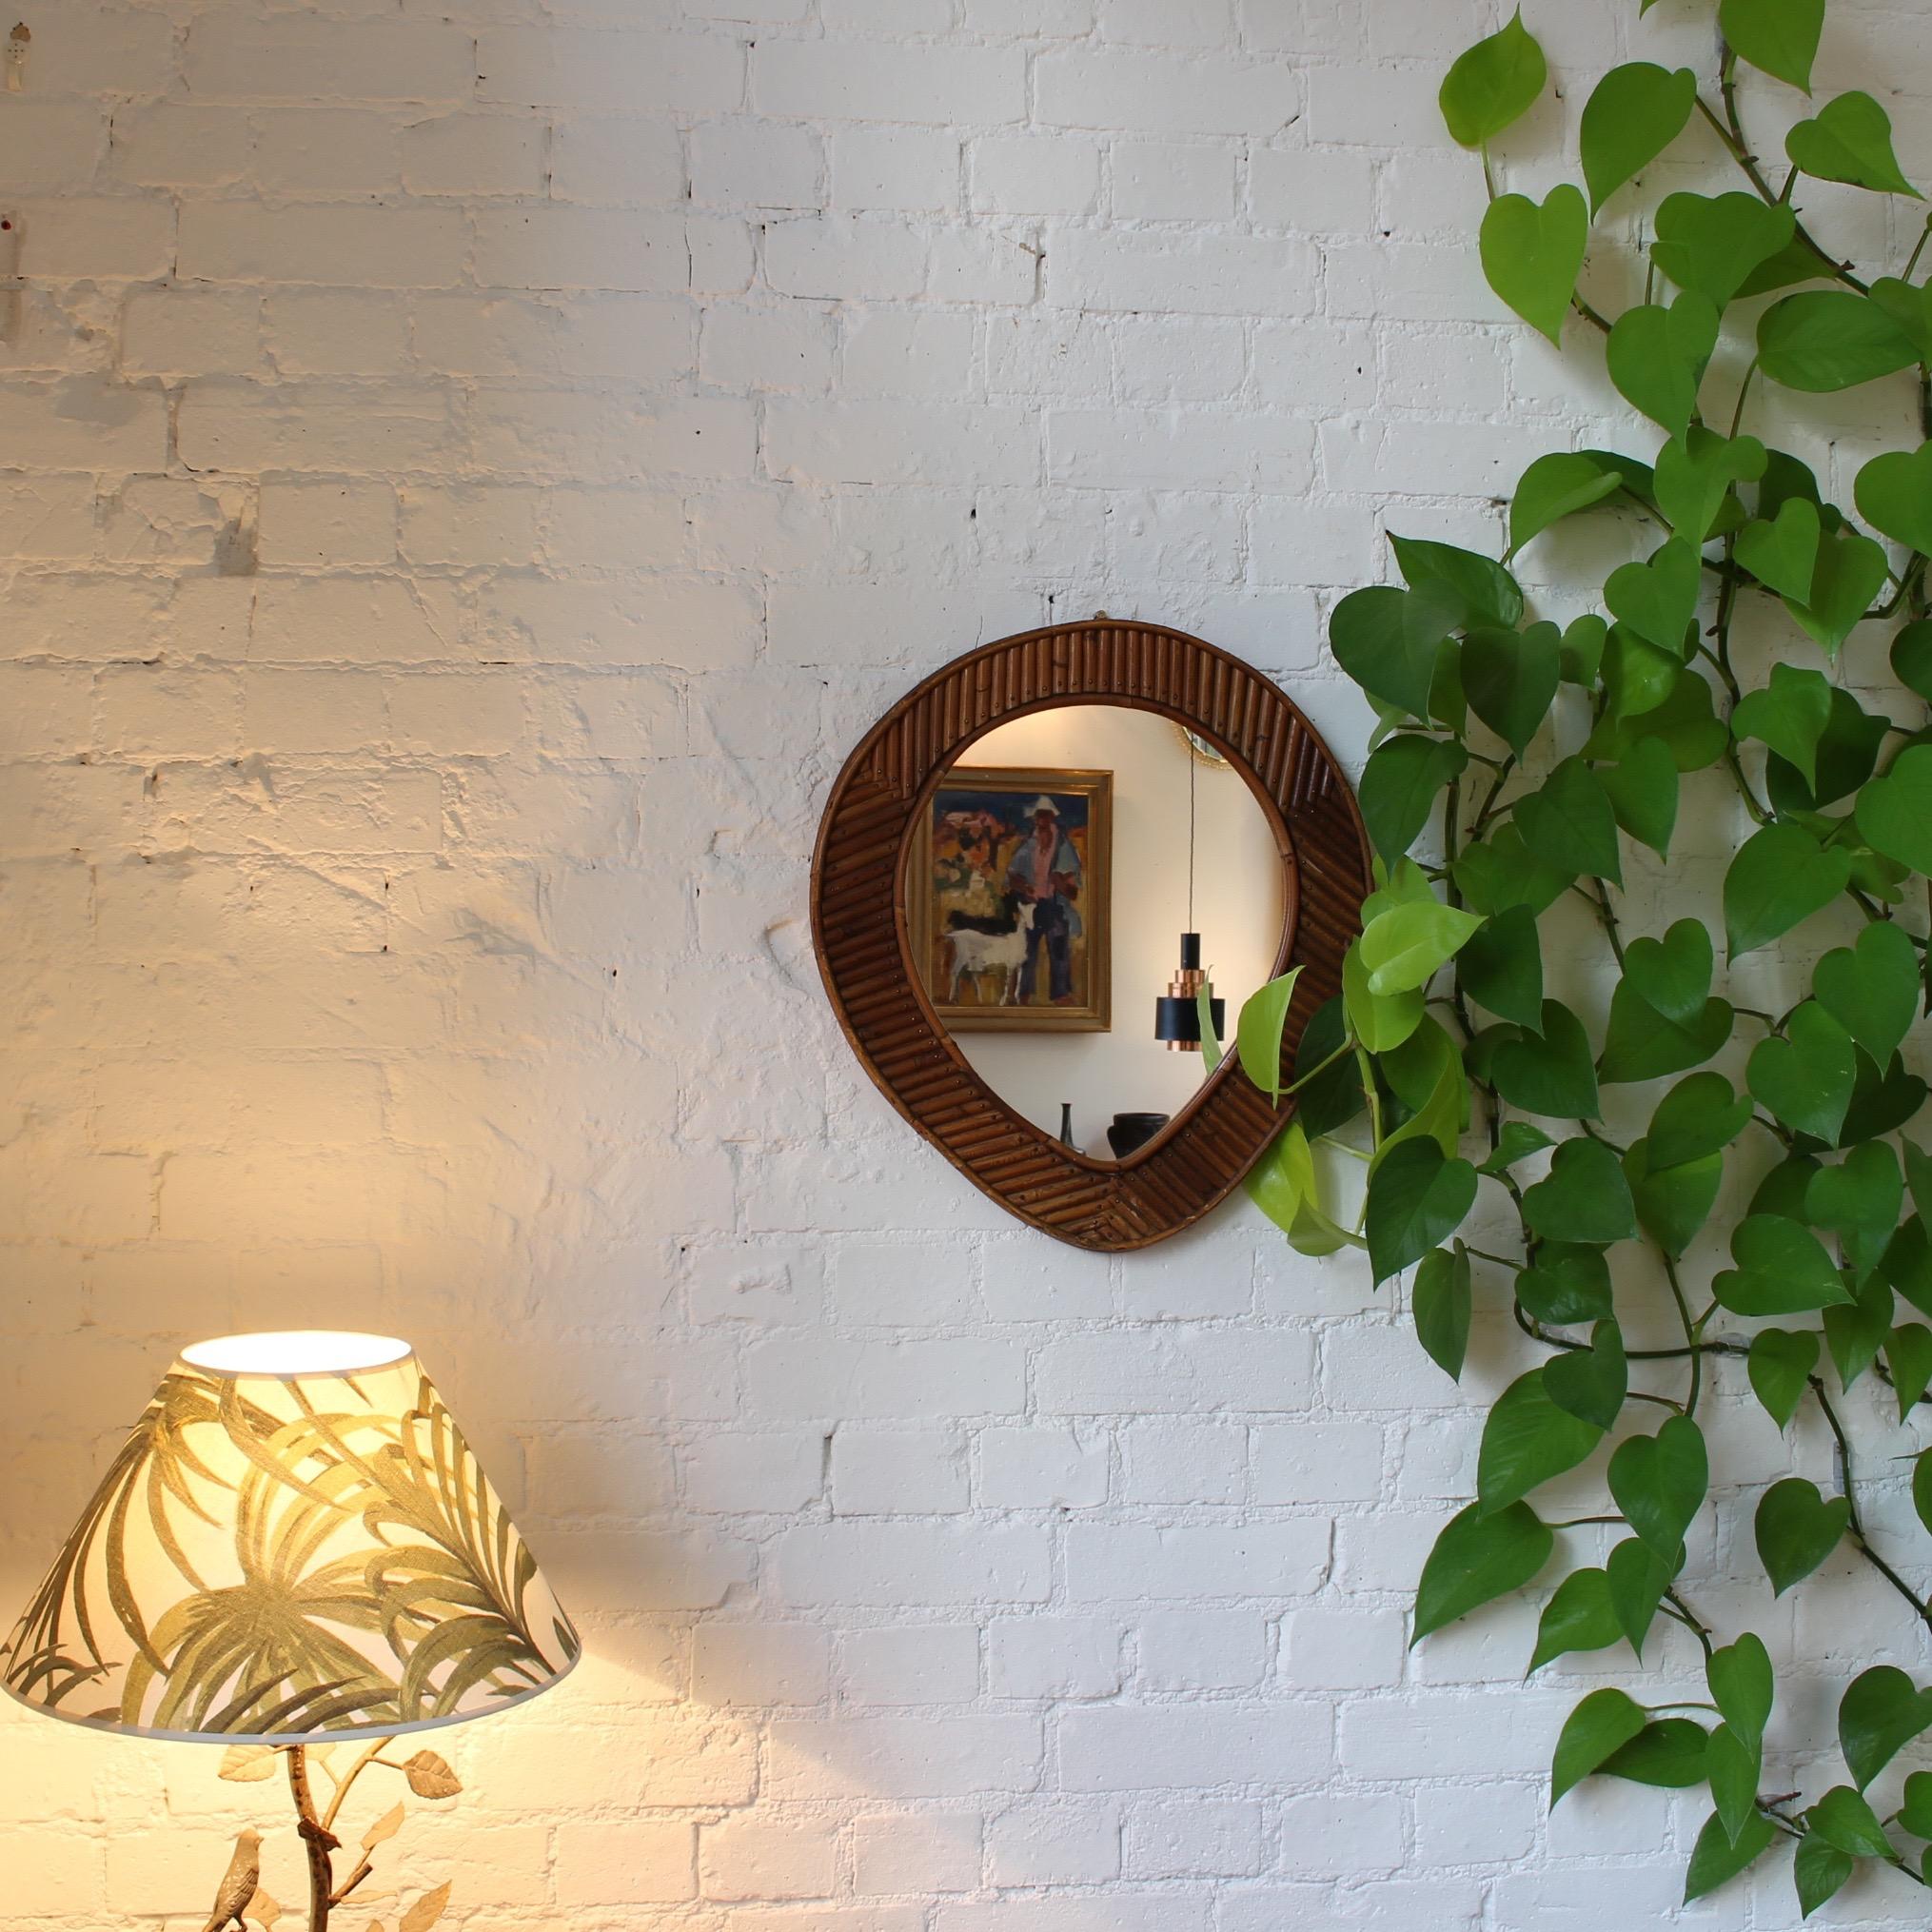 French rattan tear-drop shaped mirror, circa 1960s. The inner and outer circular frames are linked by hand cut and nailed rattan reeds in opposing linear patterns. The mirror is a genuine original and very rare in the realm of vintage rattan design.